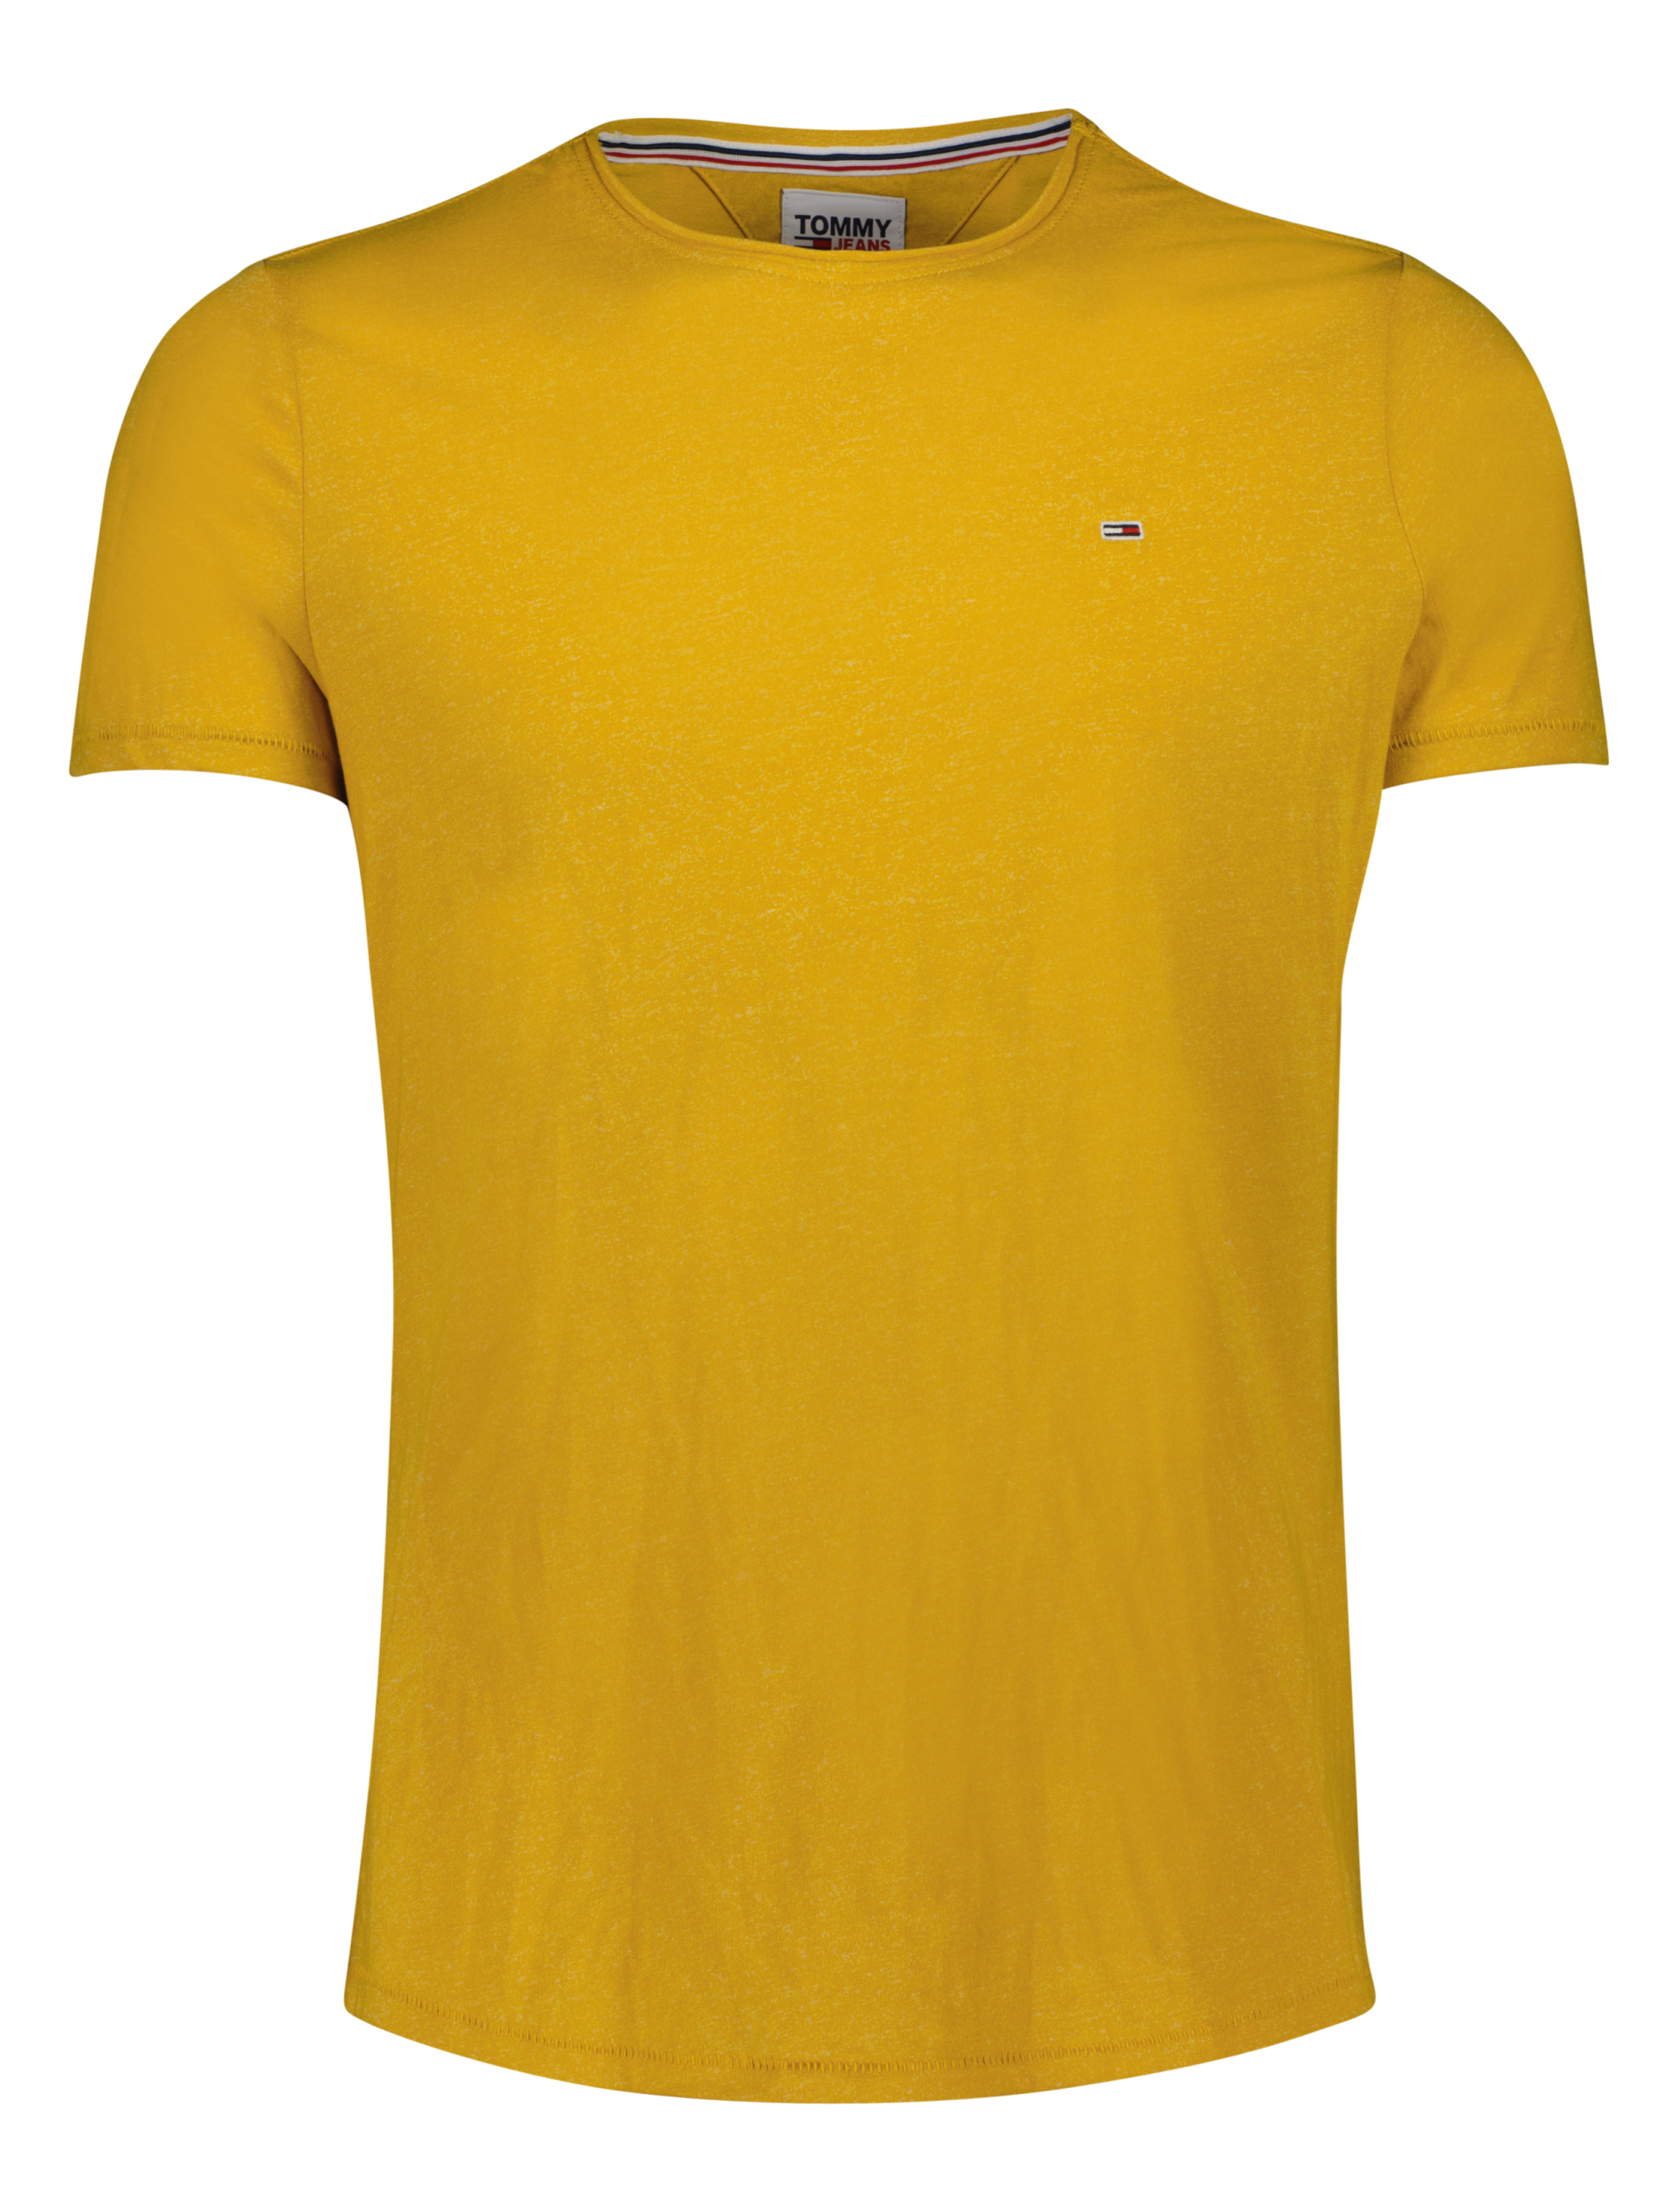 Tommy Jeans T-shirt gul / zfw yellow